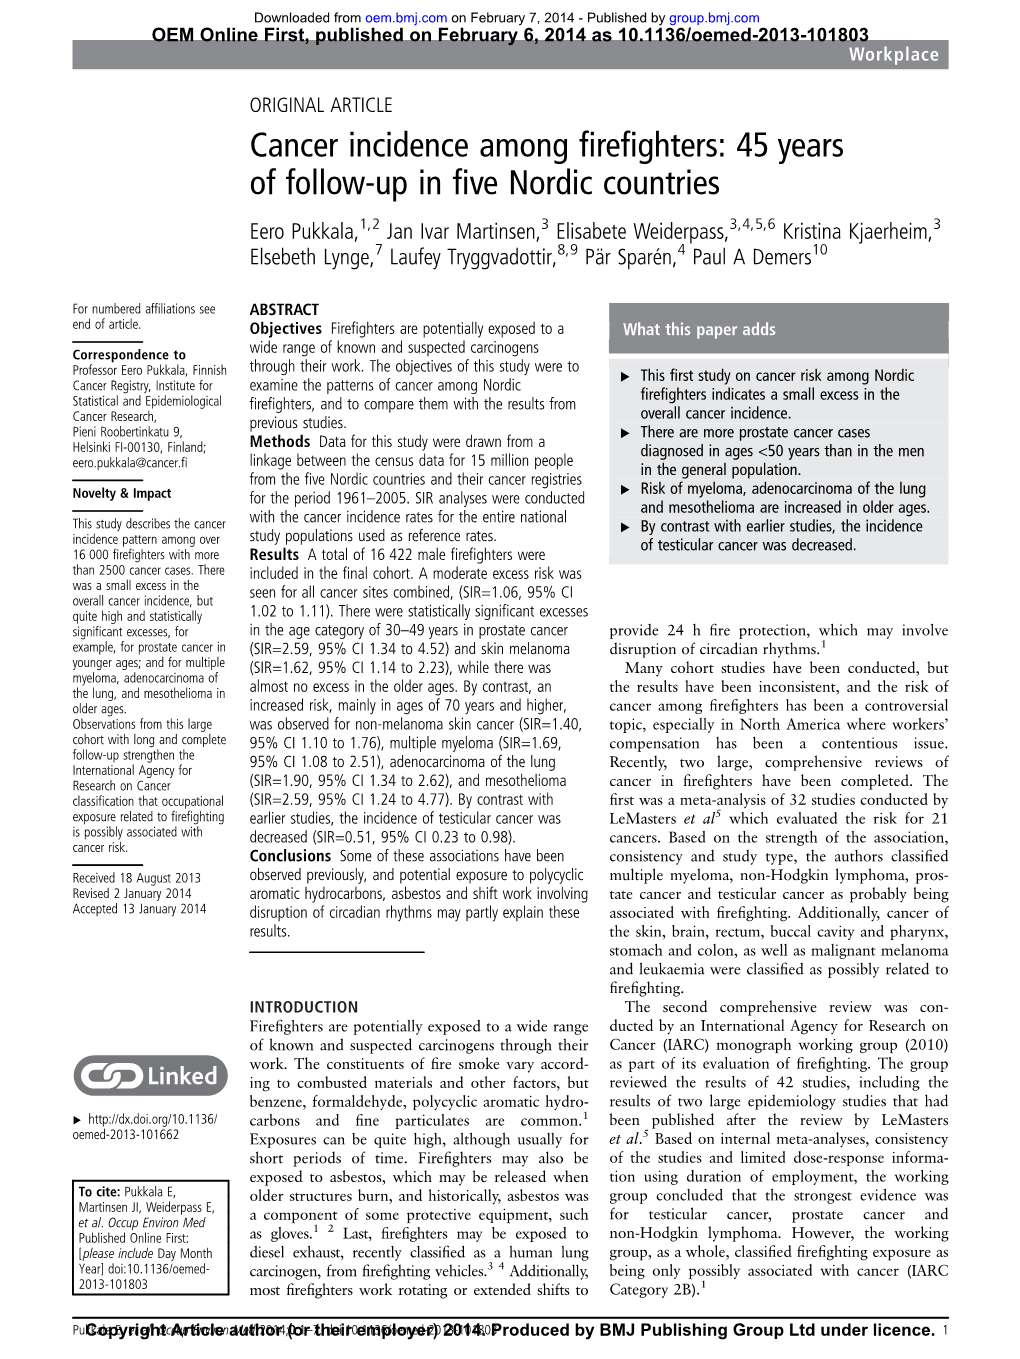 Cancer Incidence Among Firefighters: 45 Years of Follow-Up in Five Nordic Countries